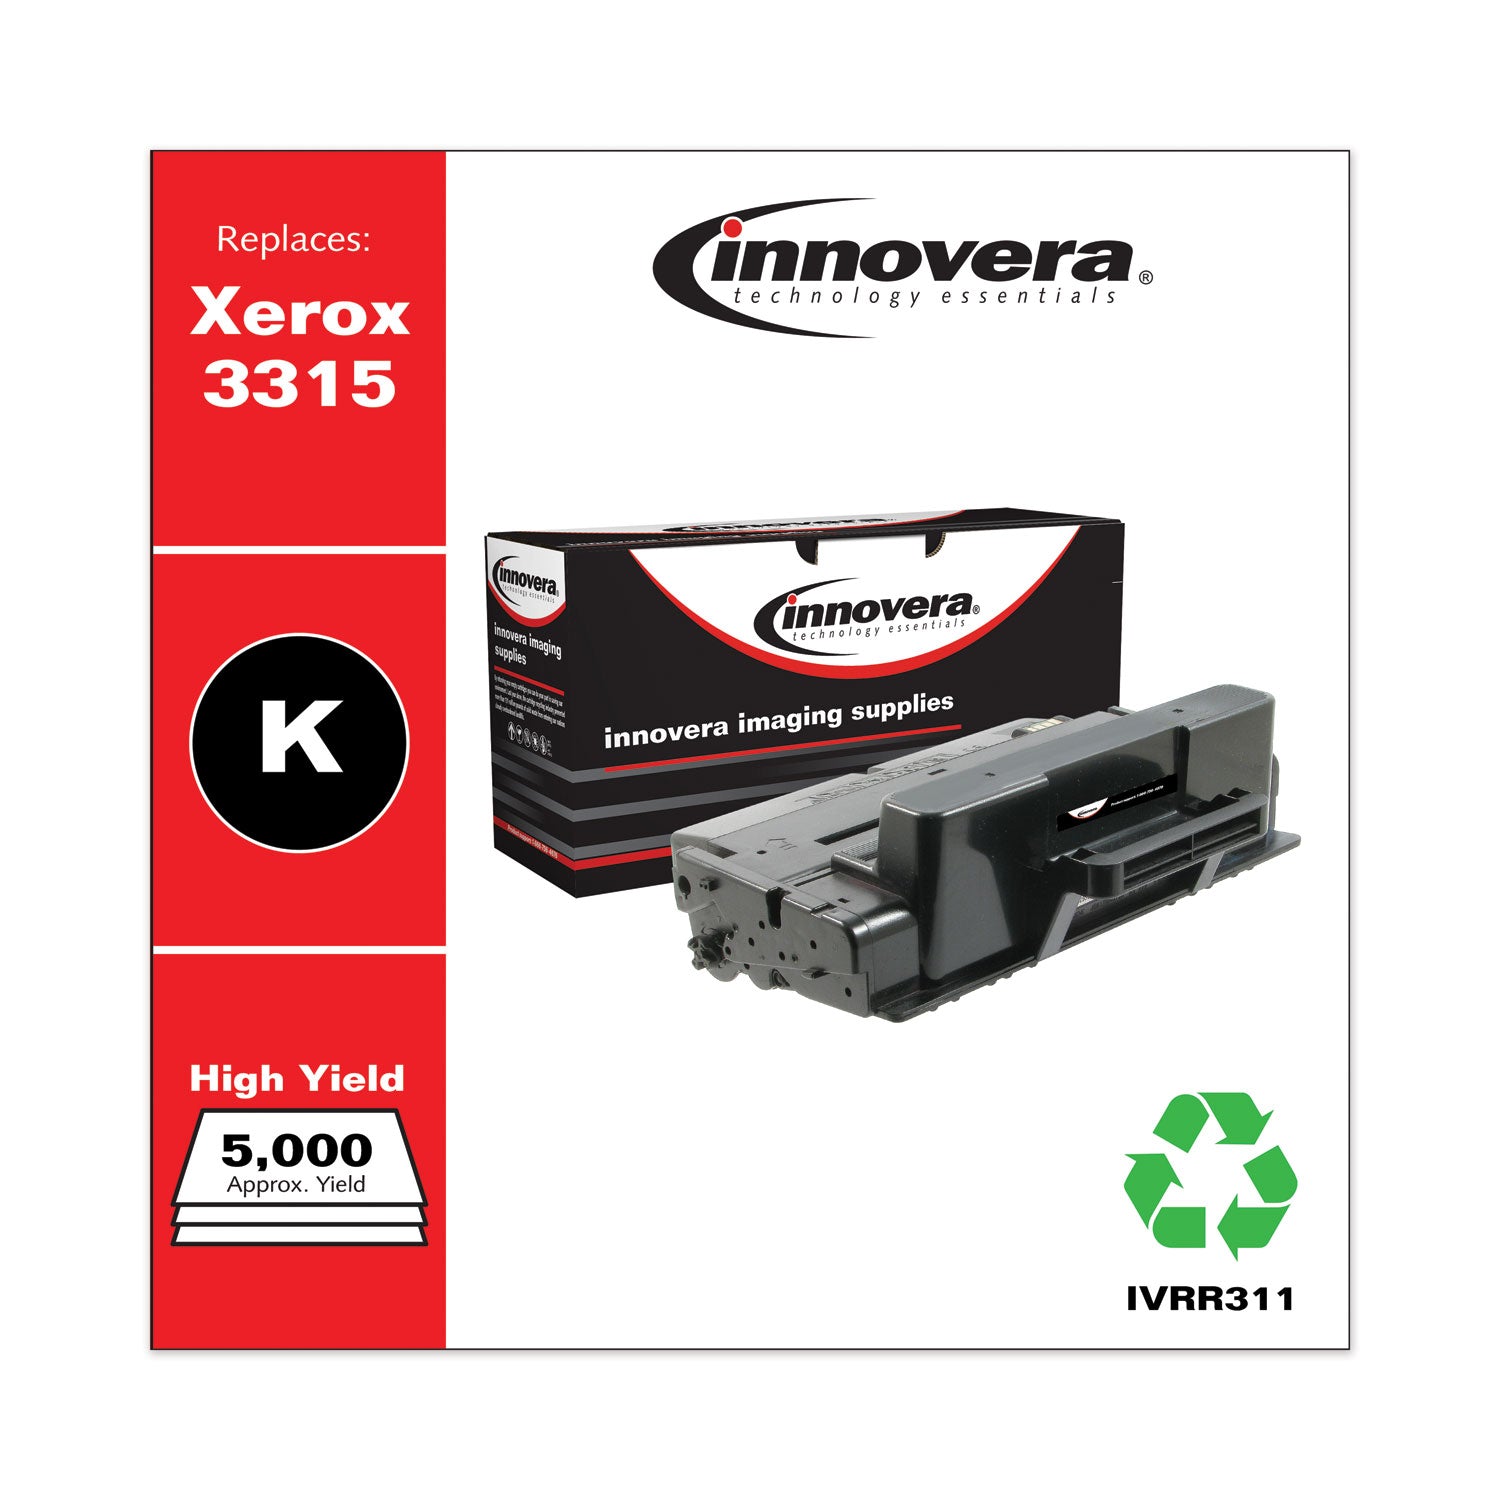 remanufactured-black-high-yield-toner-replacement-for-106r02311-5000-page-yield_ivrr311 - 2